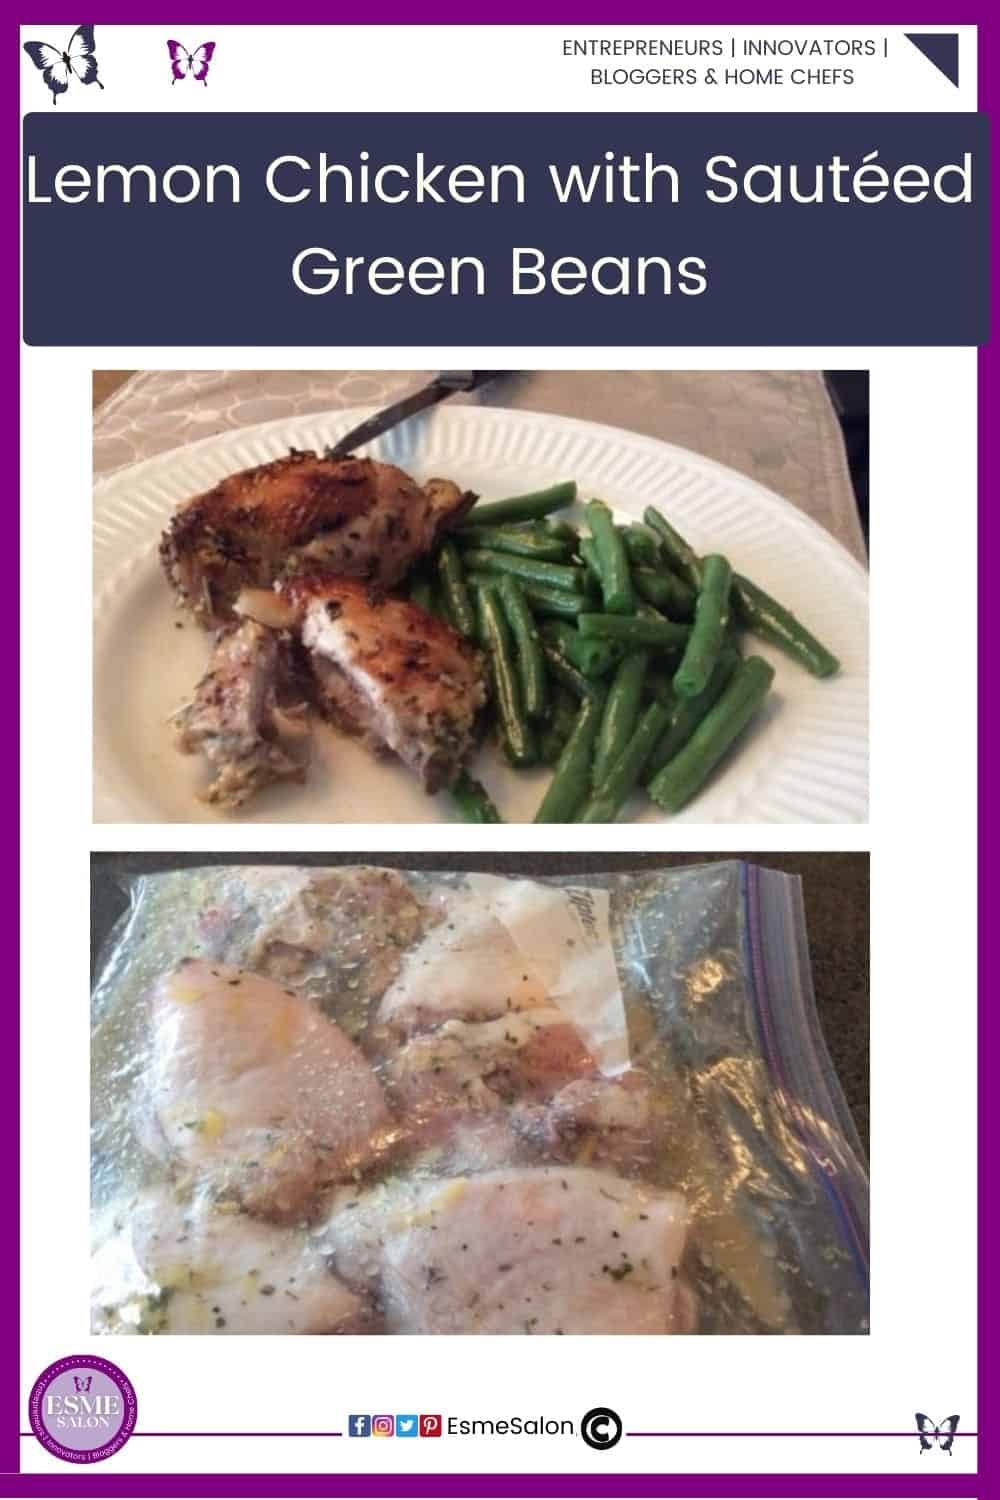 an image of a Ziploc bag with lemon marinade and chicken as well as a white serving plate with cooked Lemon Chicken and Sautéed Green Beans